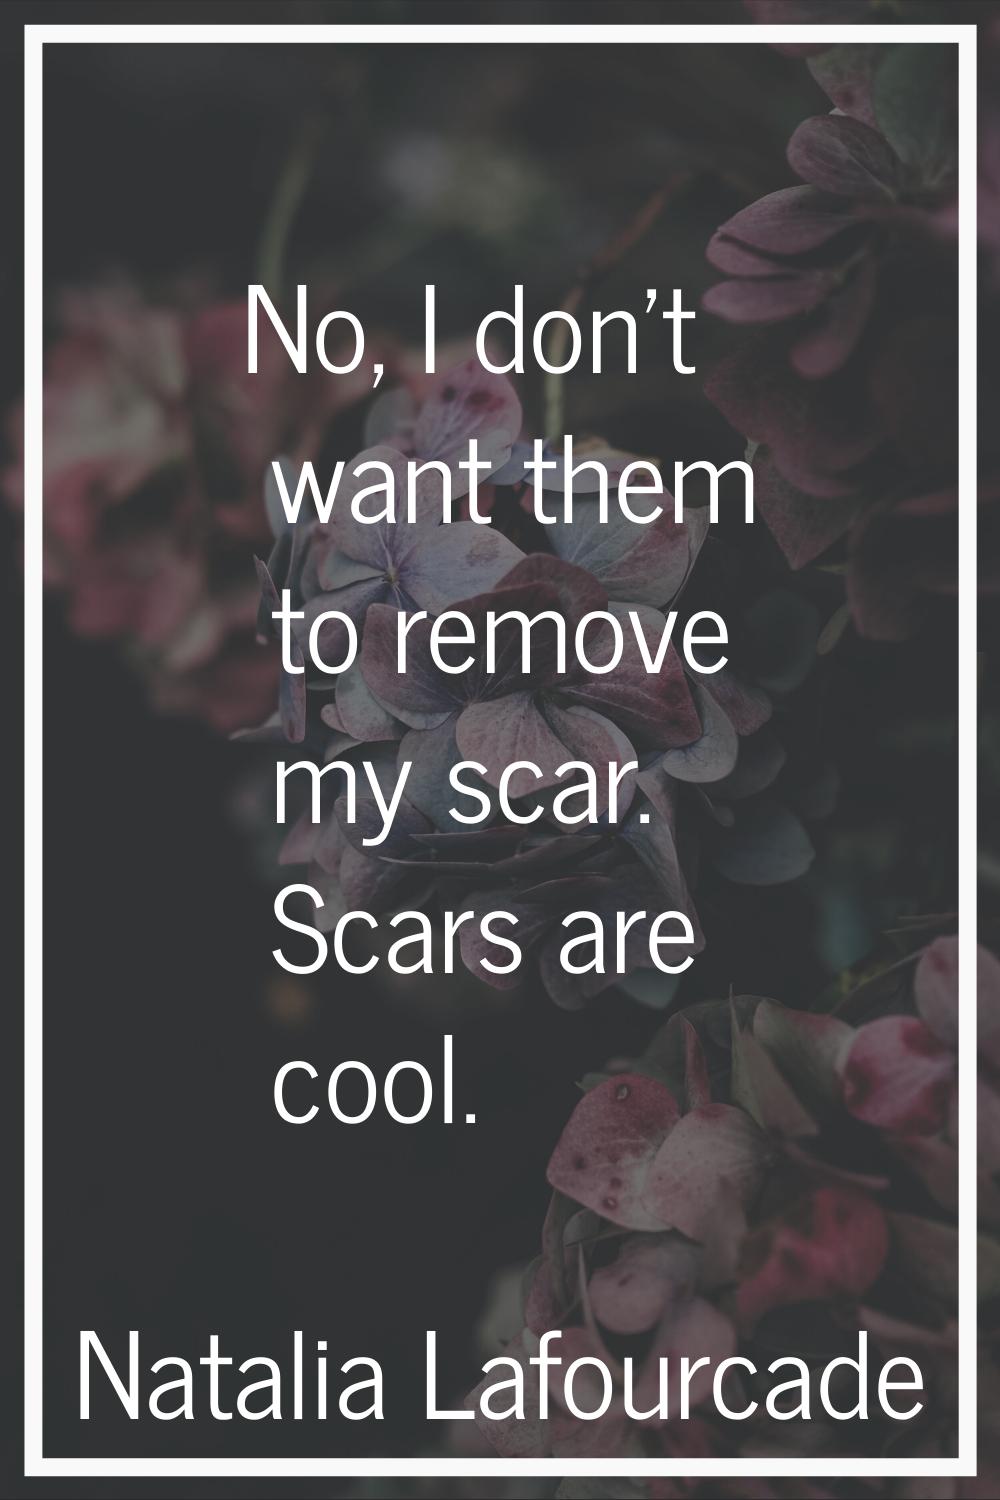 No, I don't want them to remove my scar. Scars are cool.